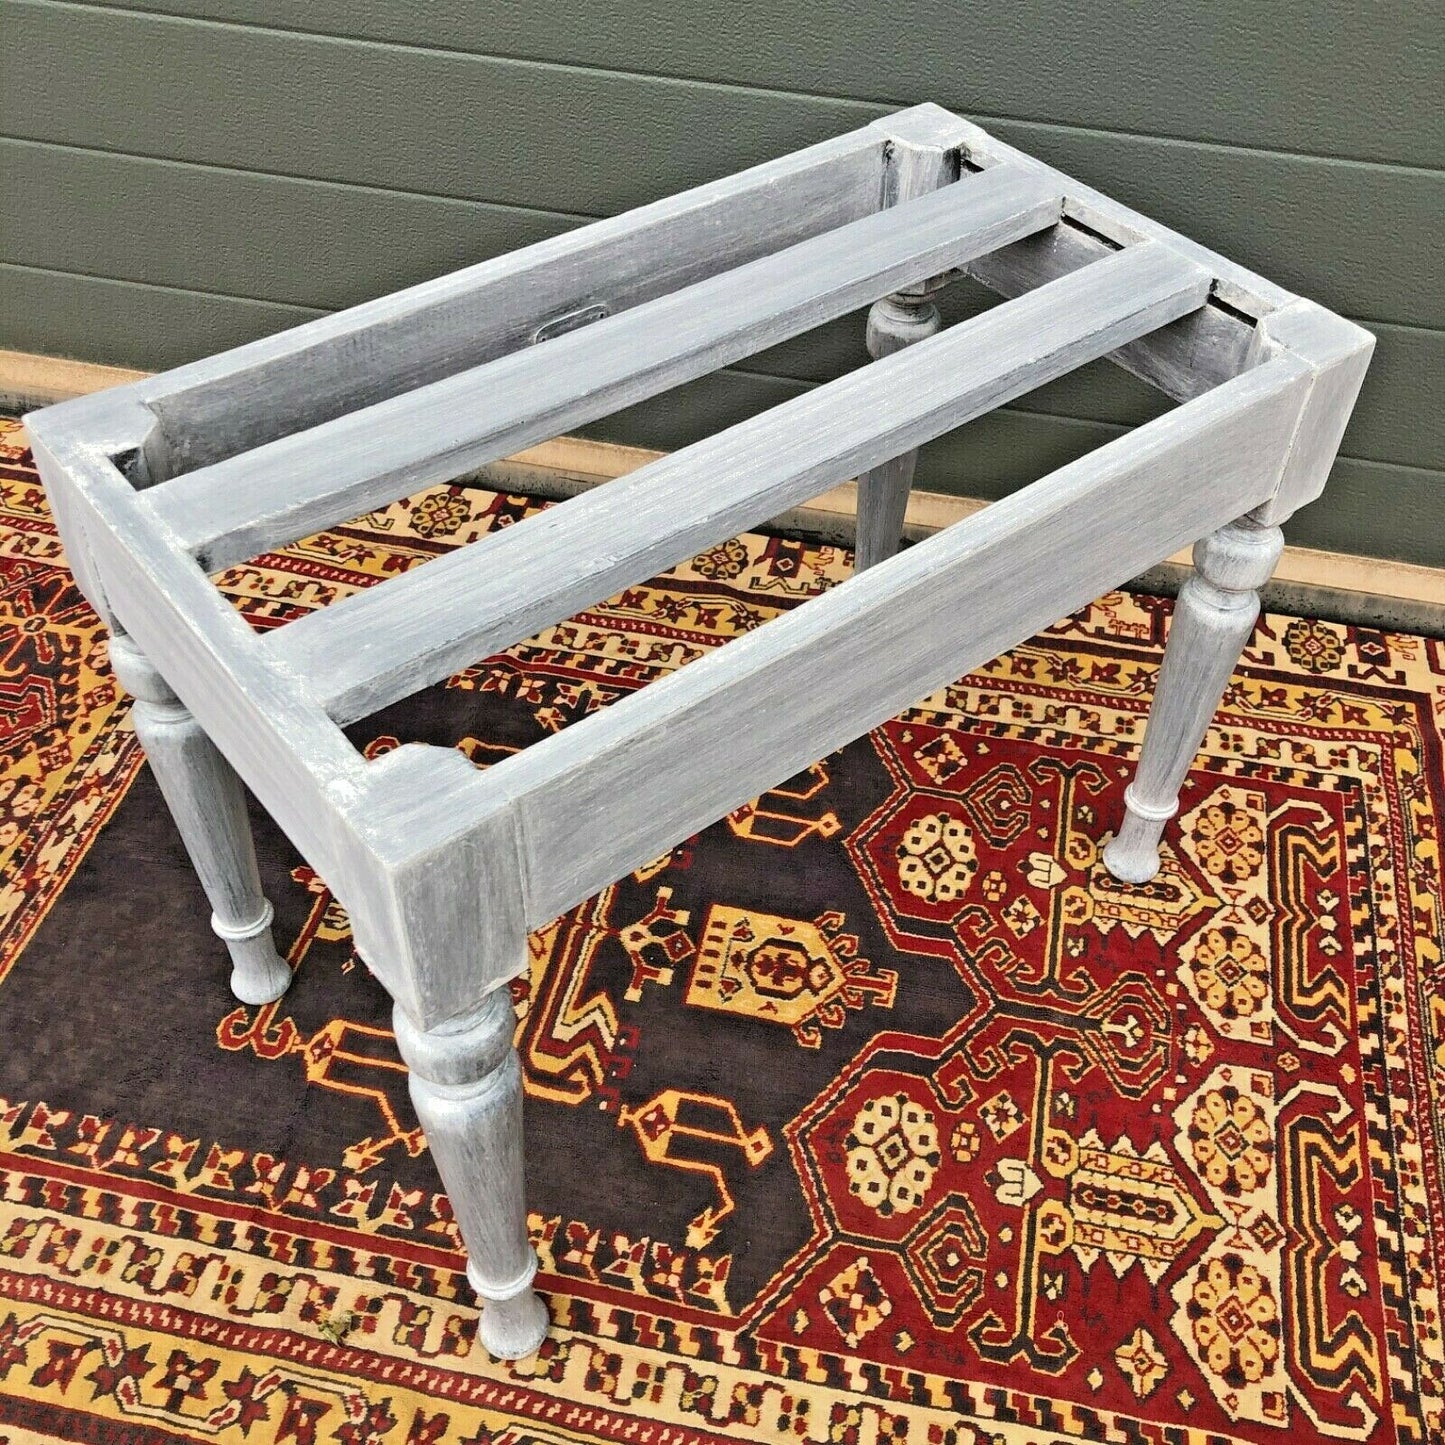 Antique Luggage Stand / Refinished Suitcase Rack ( SOLD )